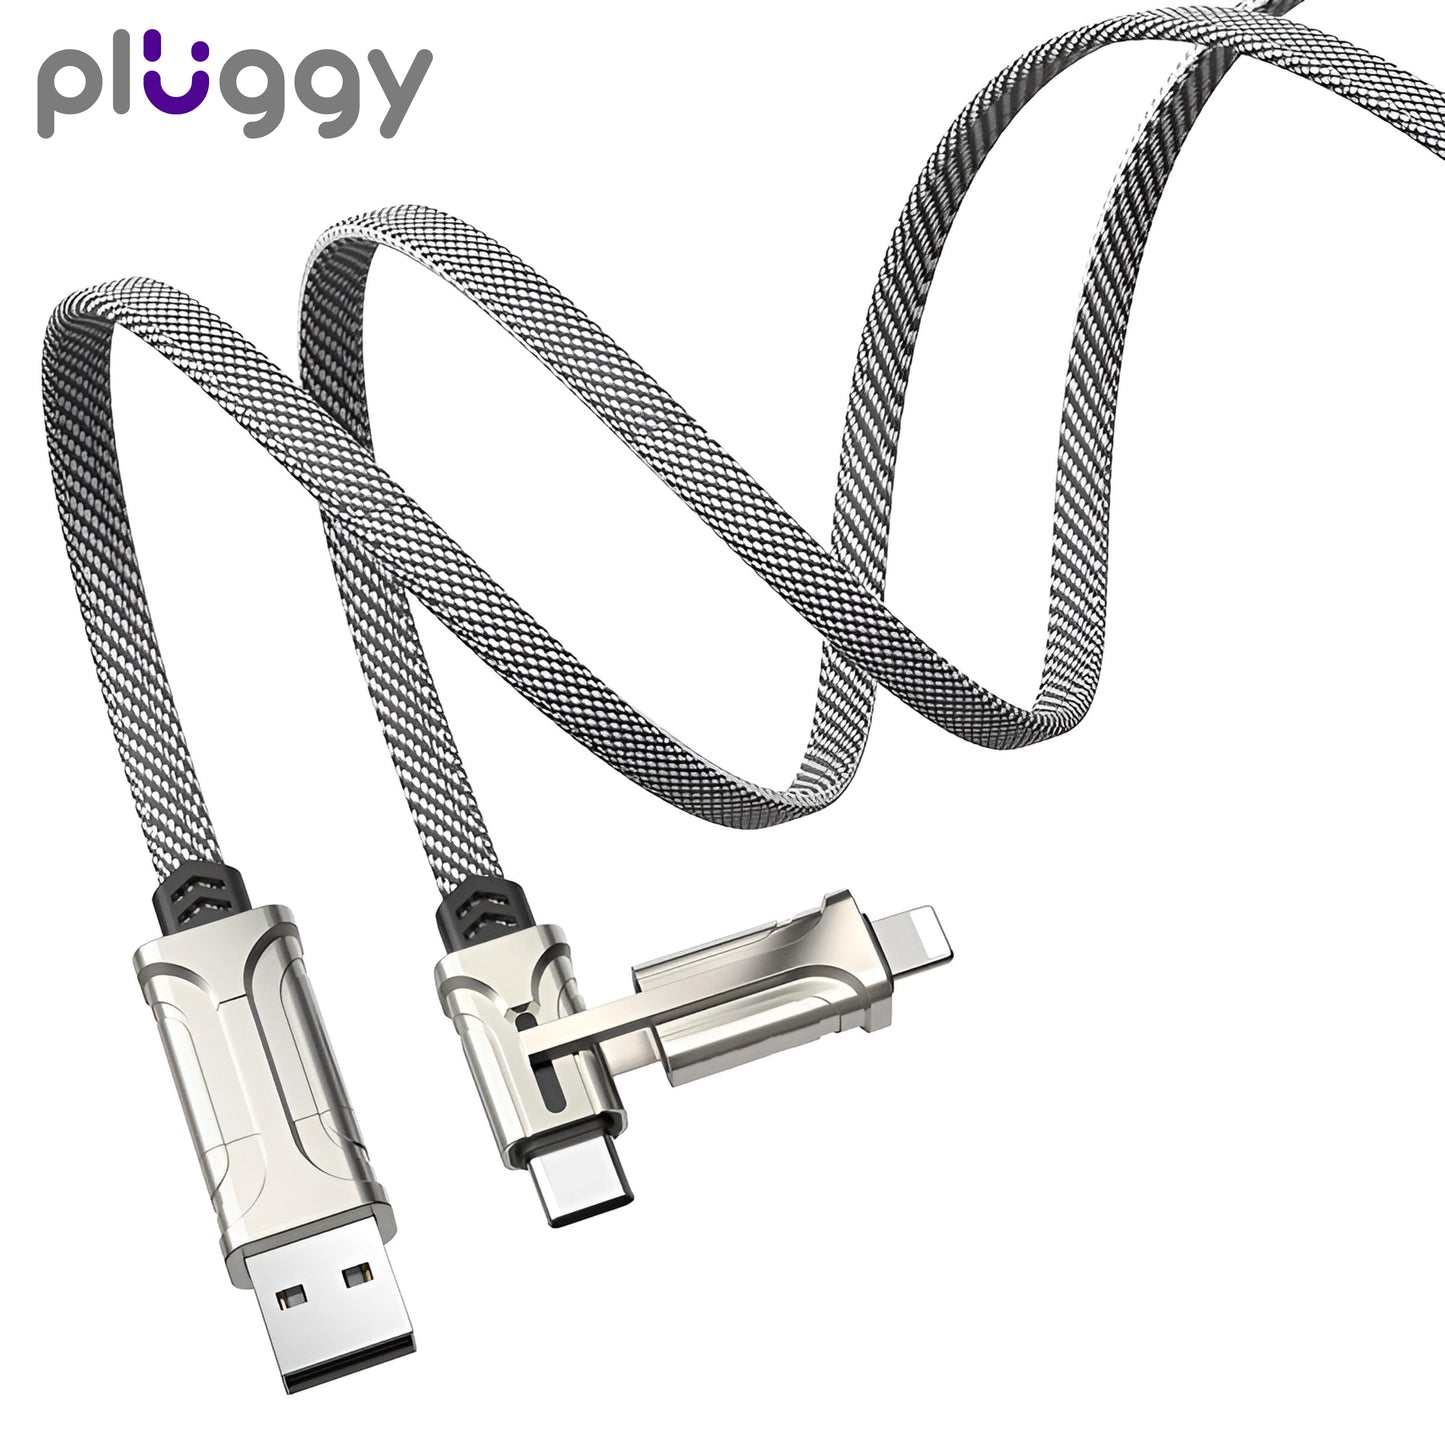 Pluggy Cable 6 in 1 (2.5M)